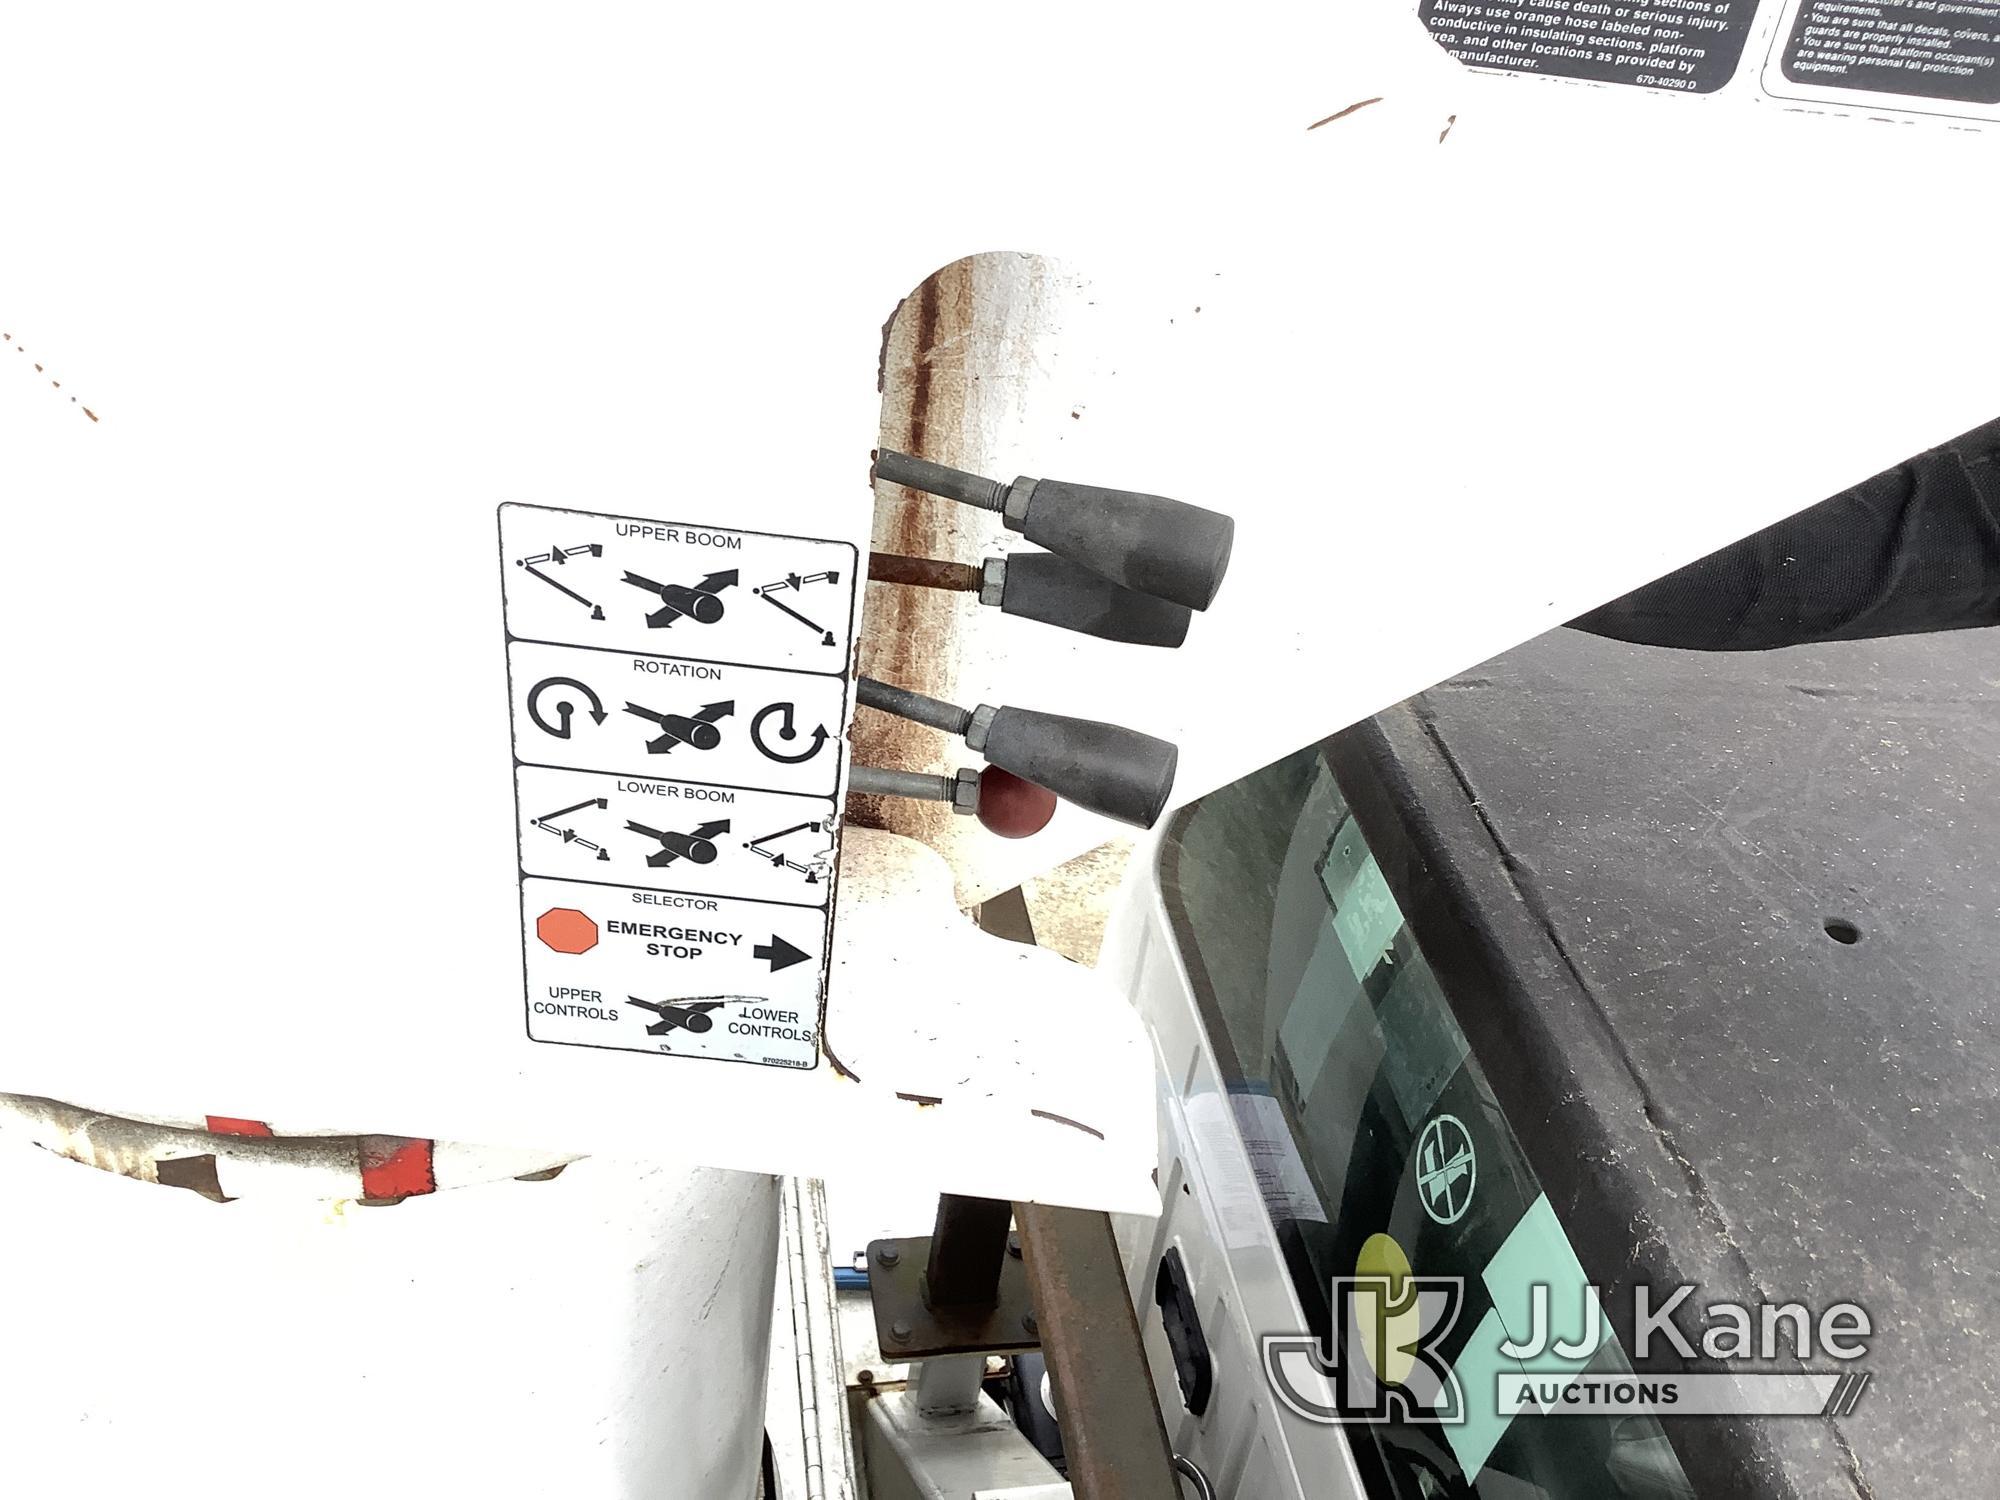 (Deposit, NY) Altec LR756, Over-Center Bucket Truck mounted behind cab on 2015 Ford F750 Chipper Dum